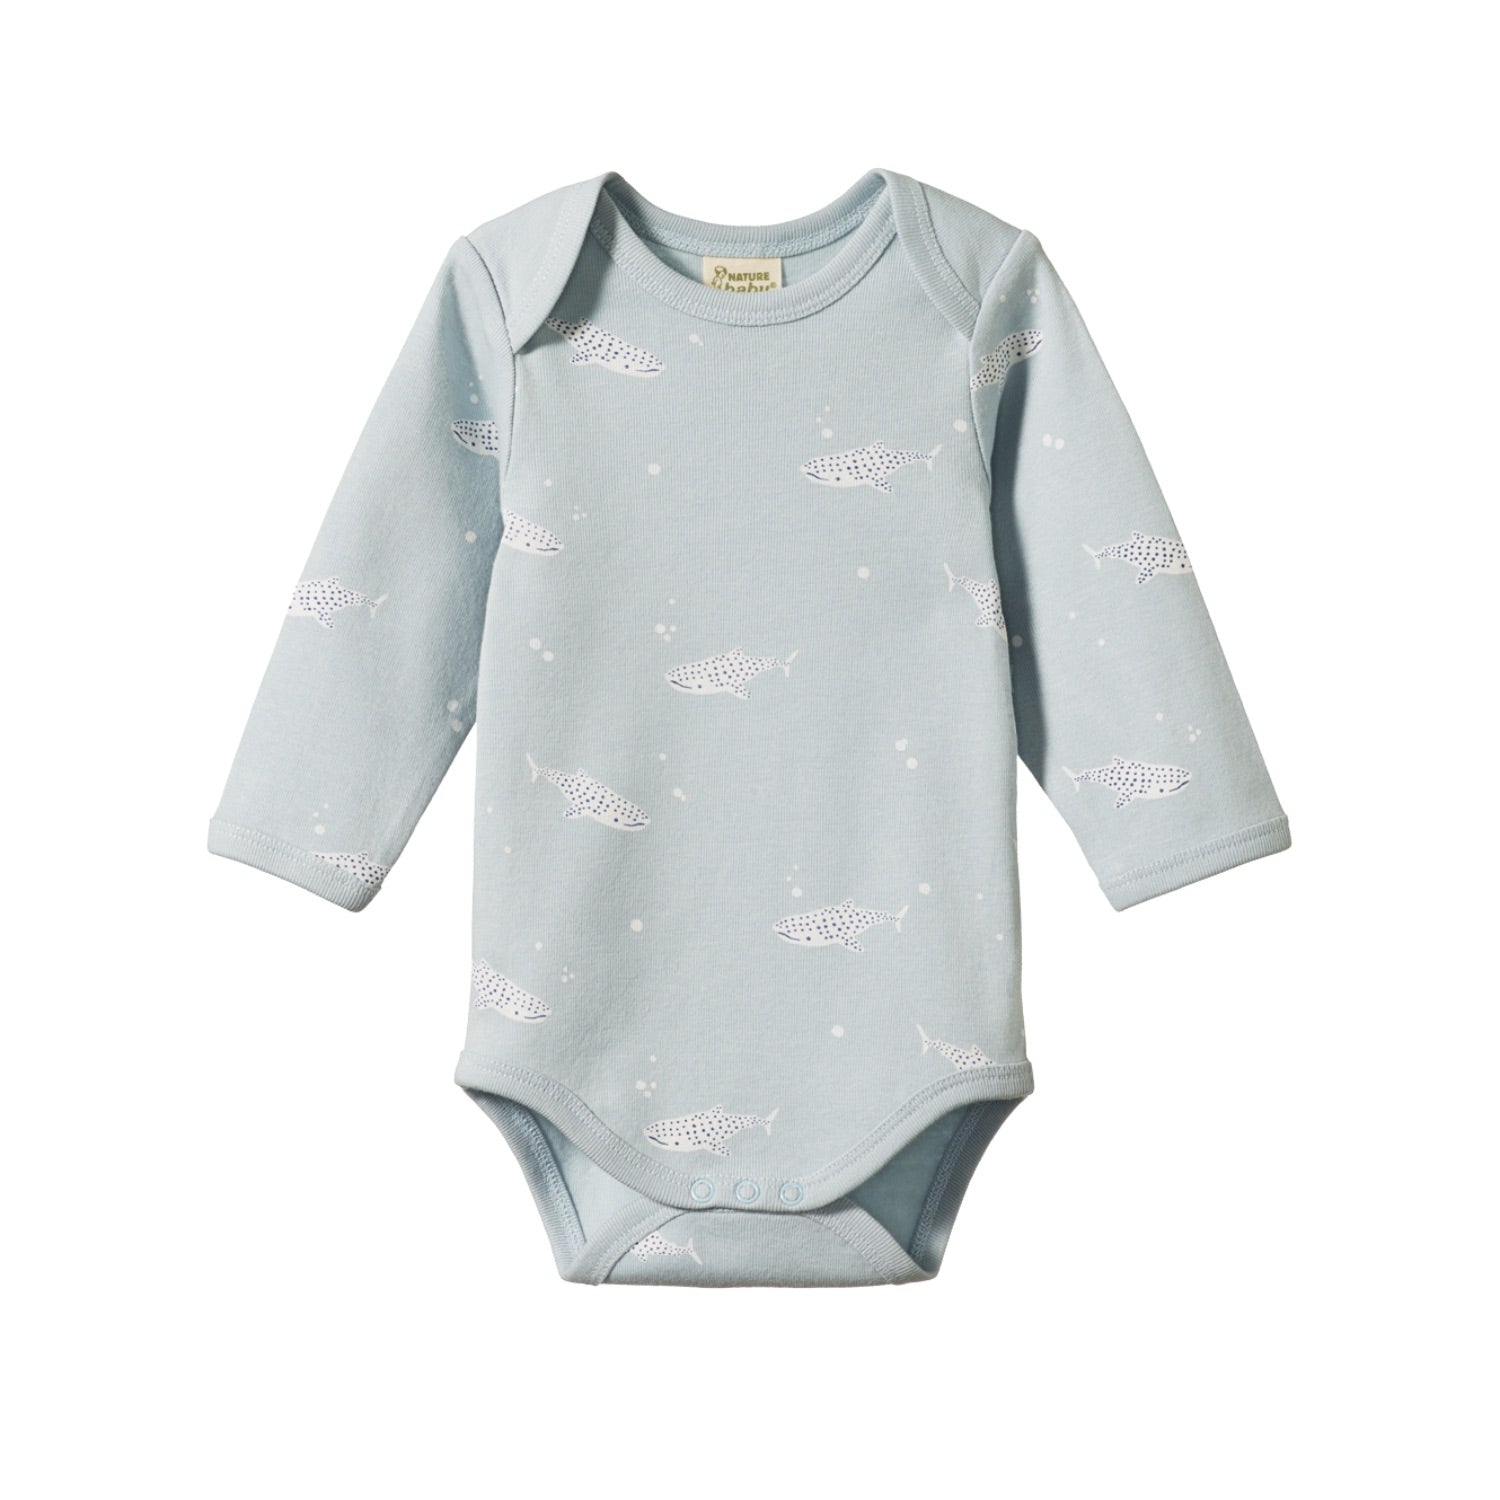 Nature Baby Bodysuit Long Sleeve Spotted Shark Print